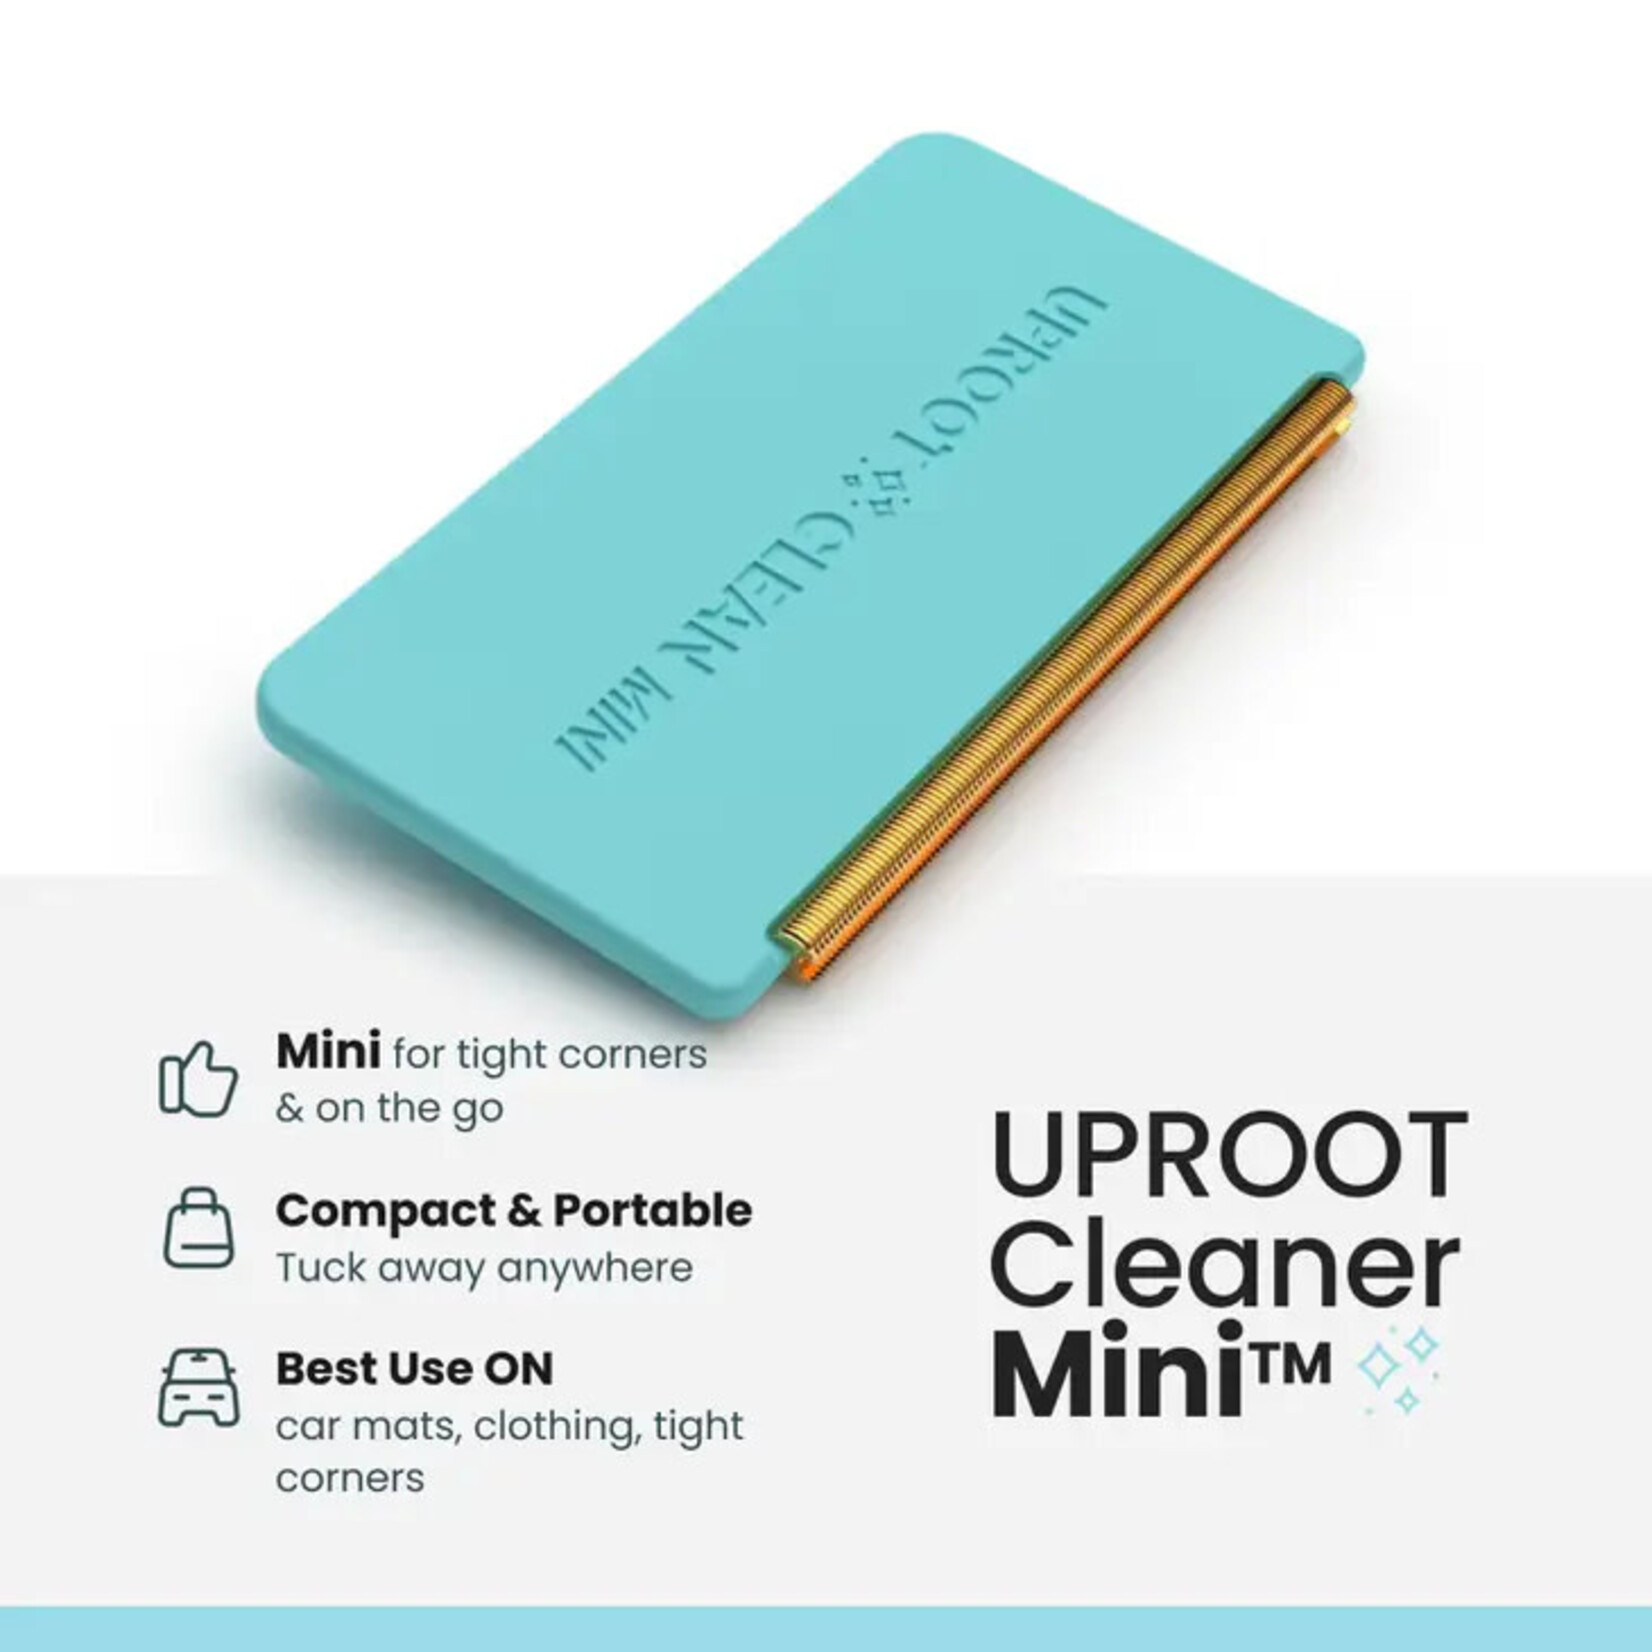 Uproot Clean Uproot Cleaner Mini